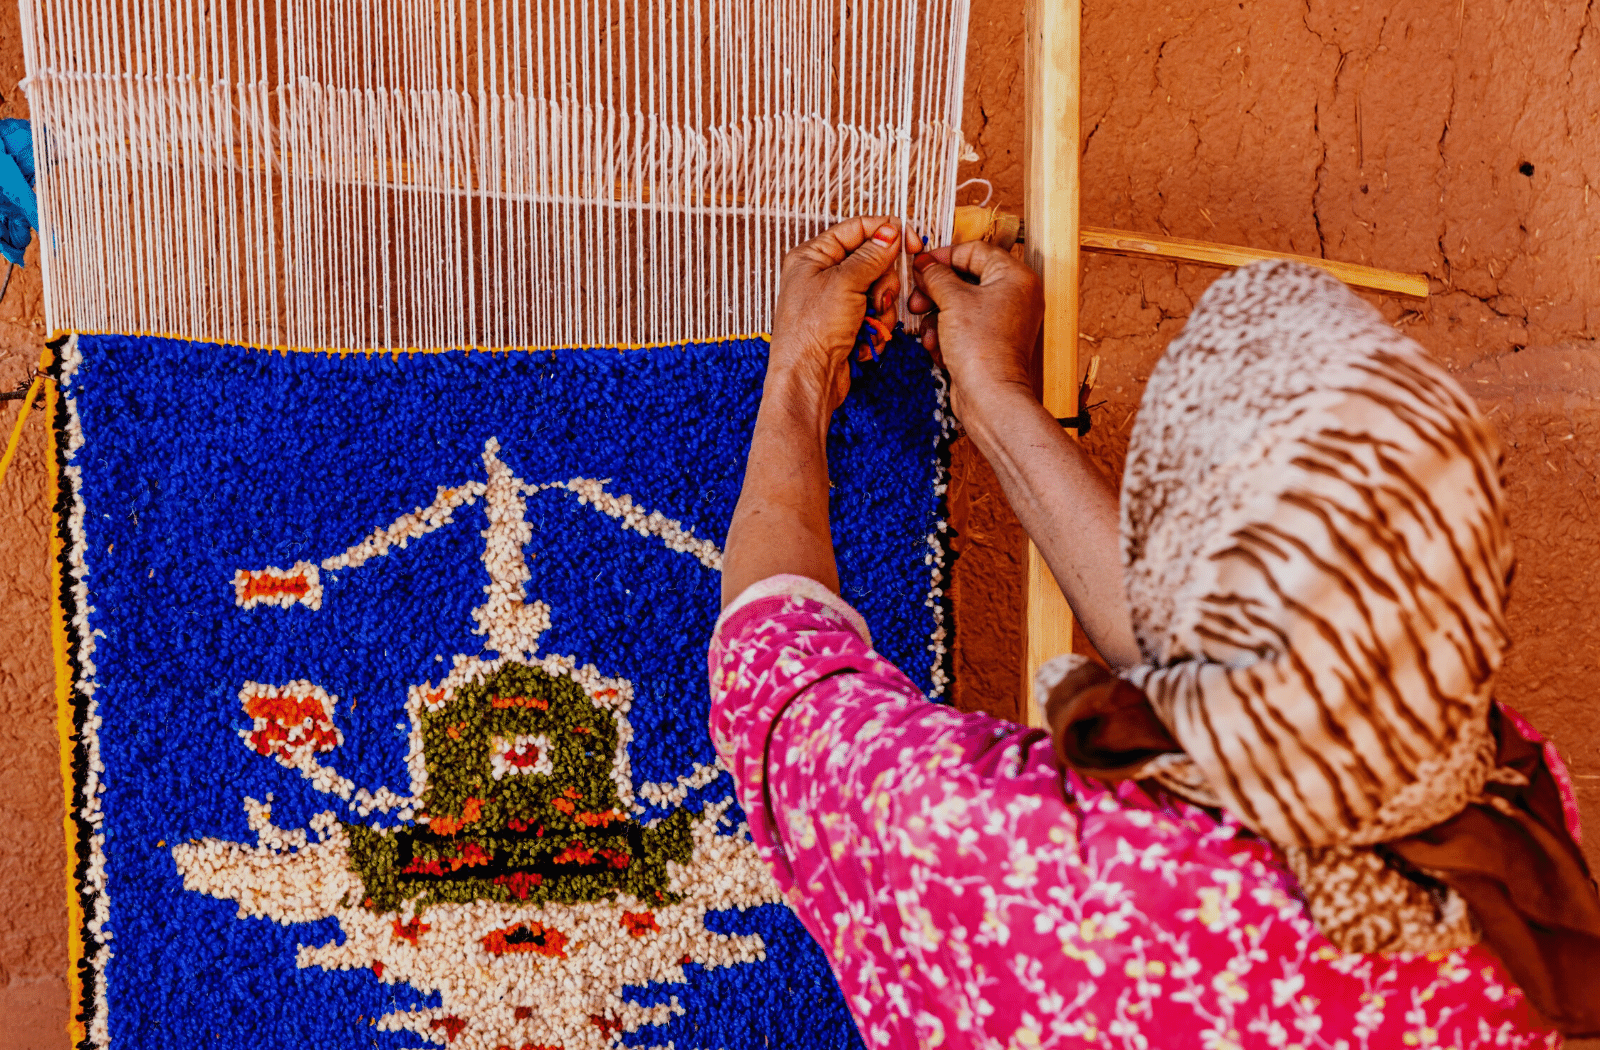 Berber woman on the loom in Morocco